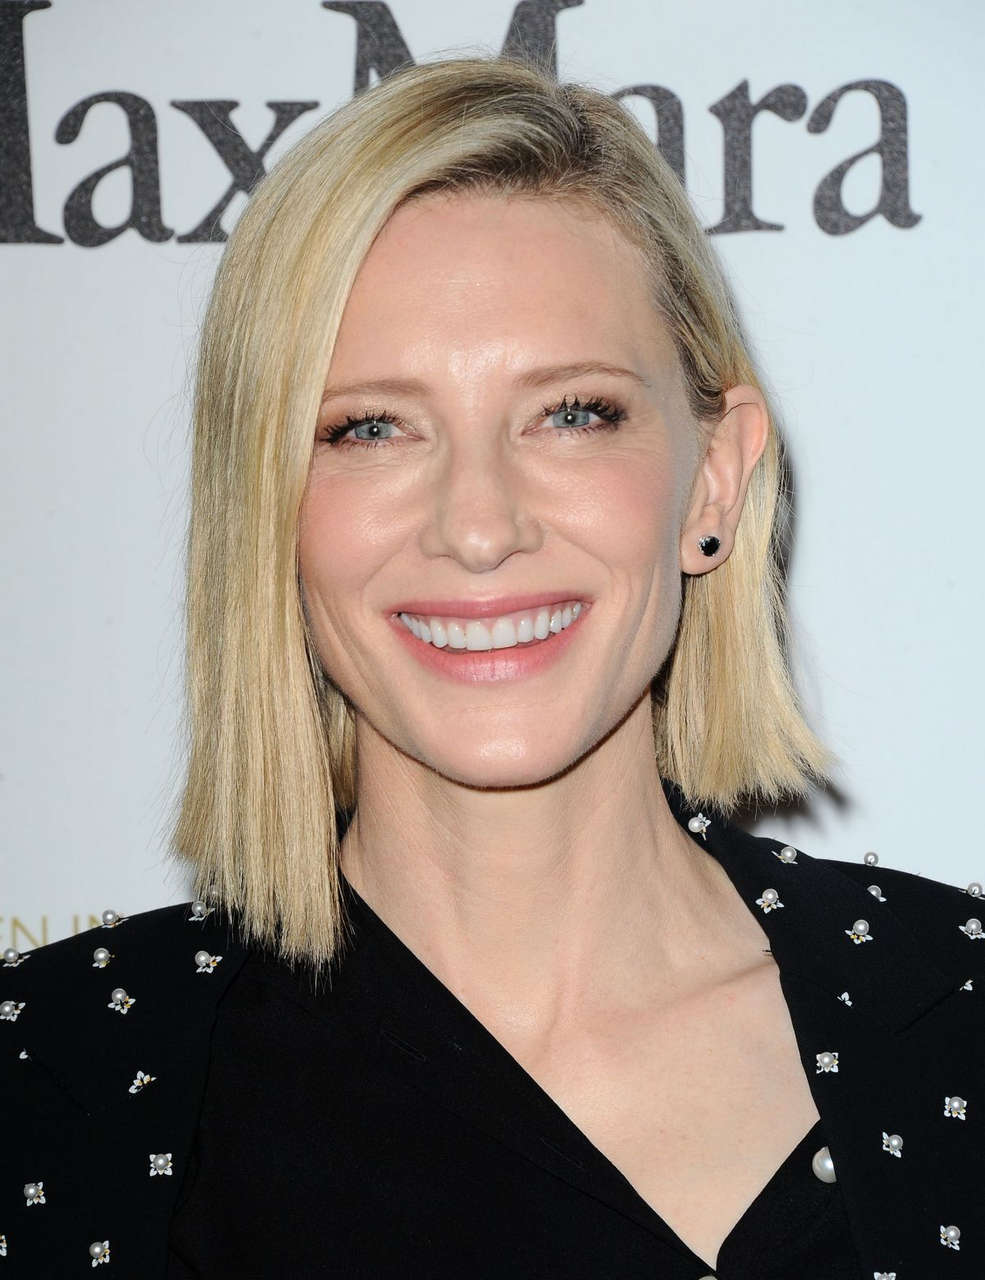 Cate Blanchett Women Film 2016 Crystal Lucy Awards Los Angeles